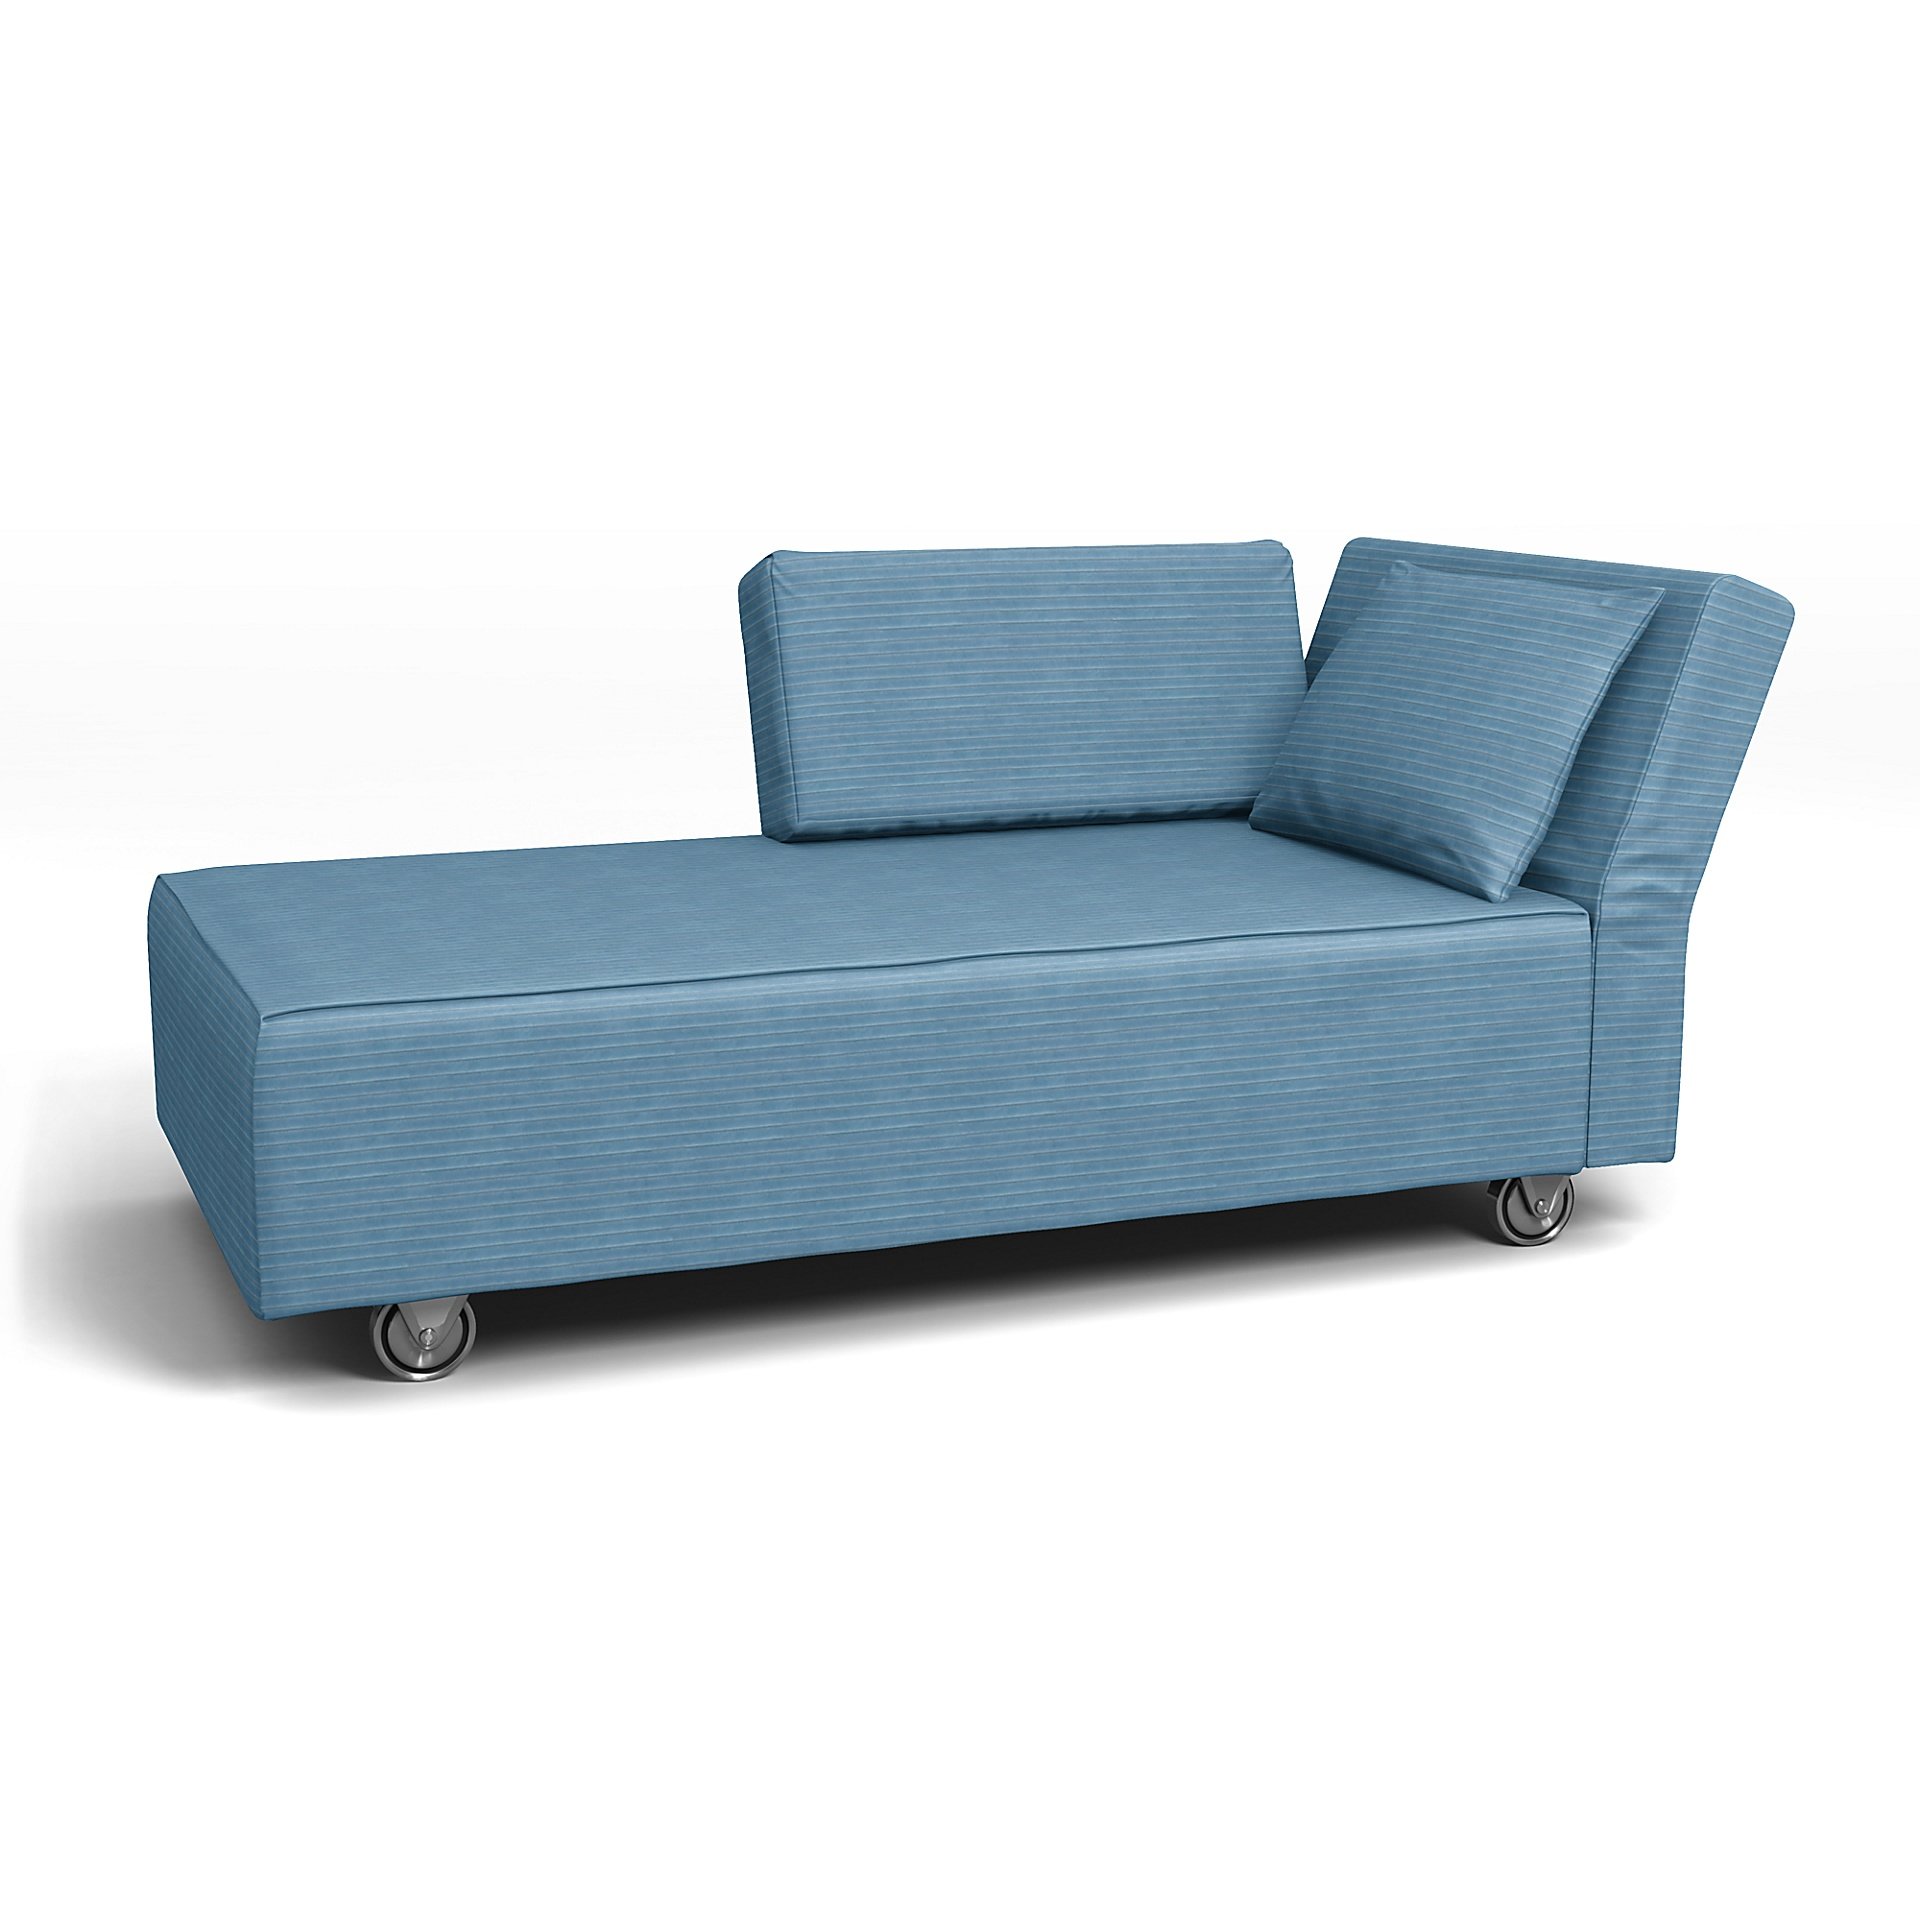 IKEA - Falsterbo Chaise with Right Armrest Cover, Sky Blue, Corduroy - Bemz